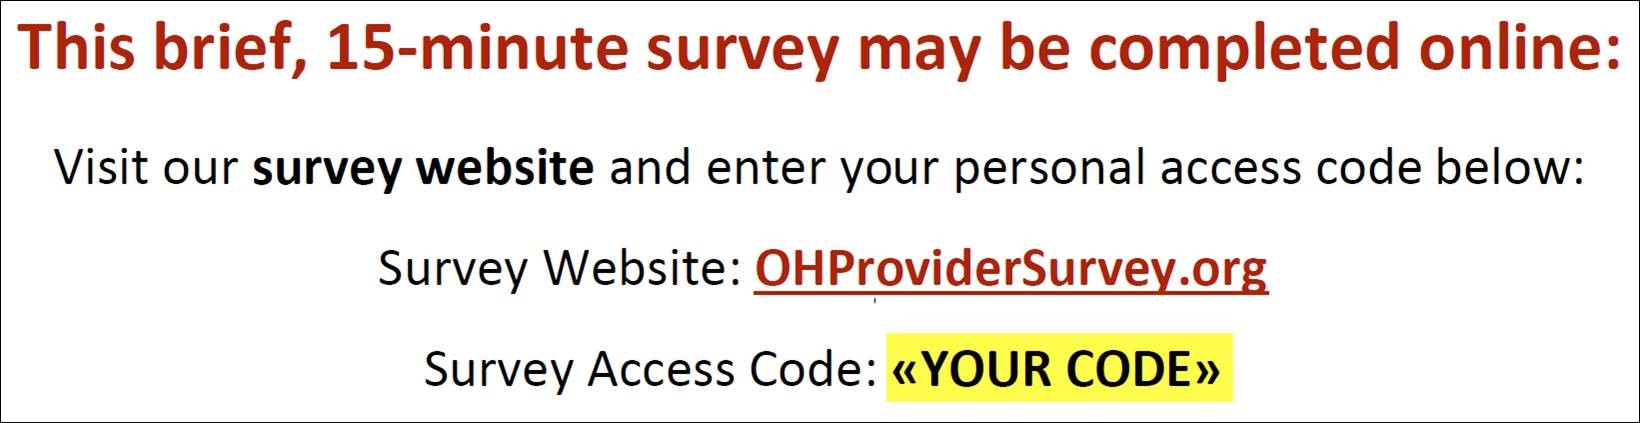 This brief, 15-minute survey may be completed online: Visit our survey website and enter your personal access code below: Survey Website: OHProviderSurvey.org Survey Access Code: «YOUR CODE»